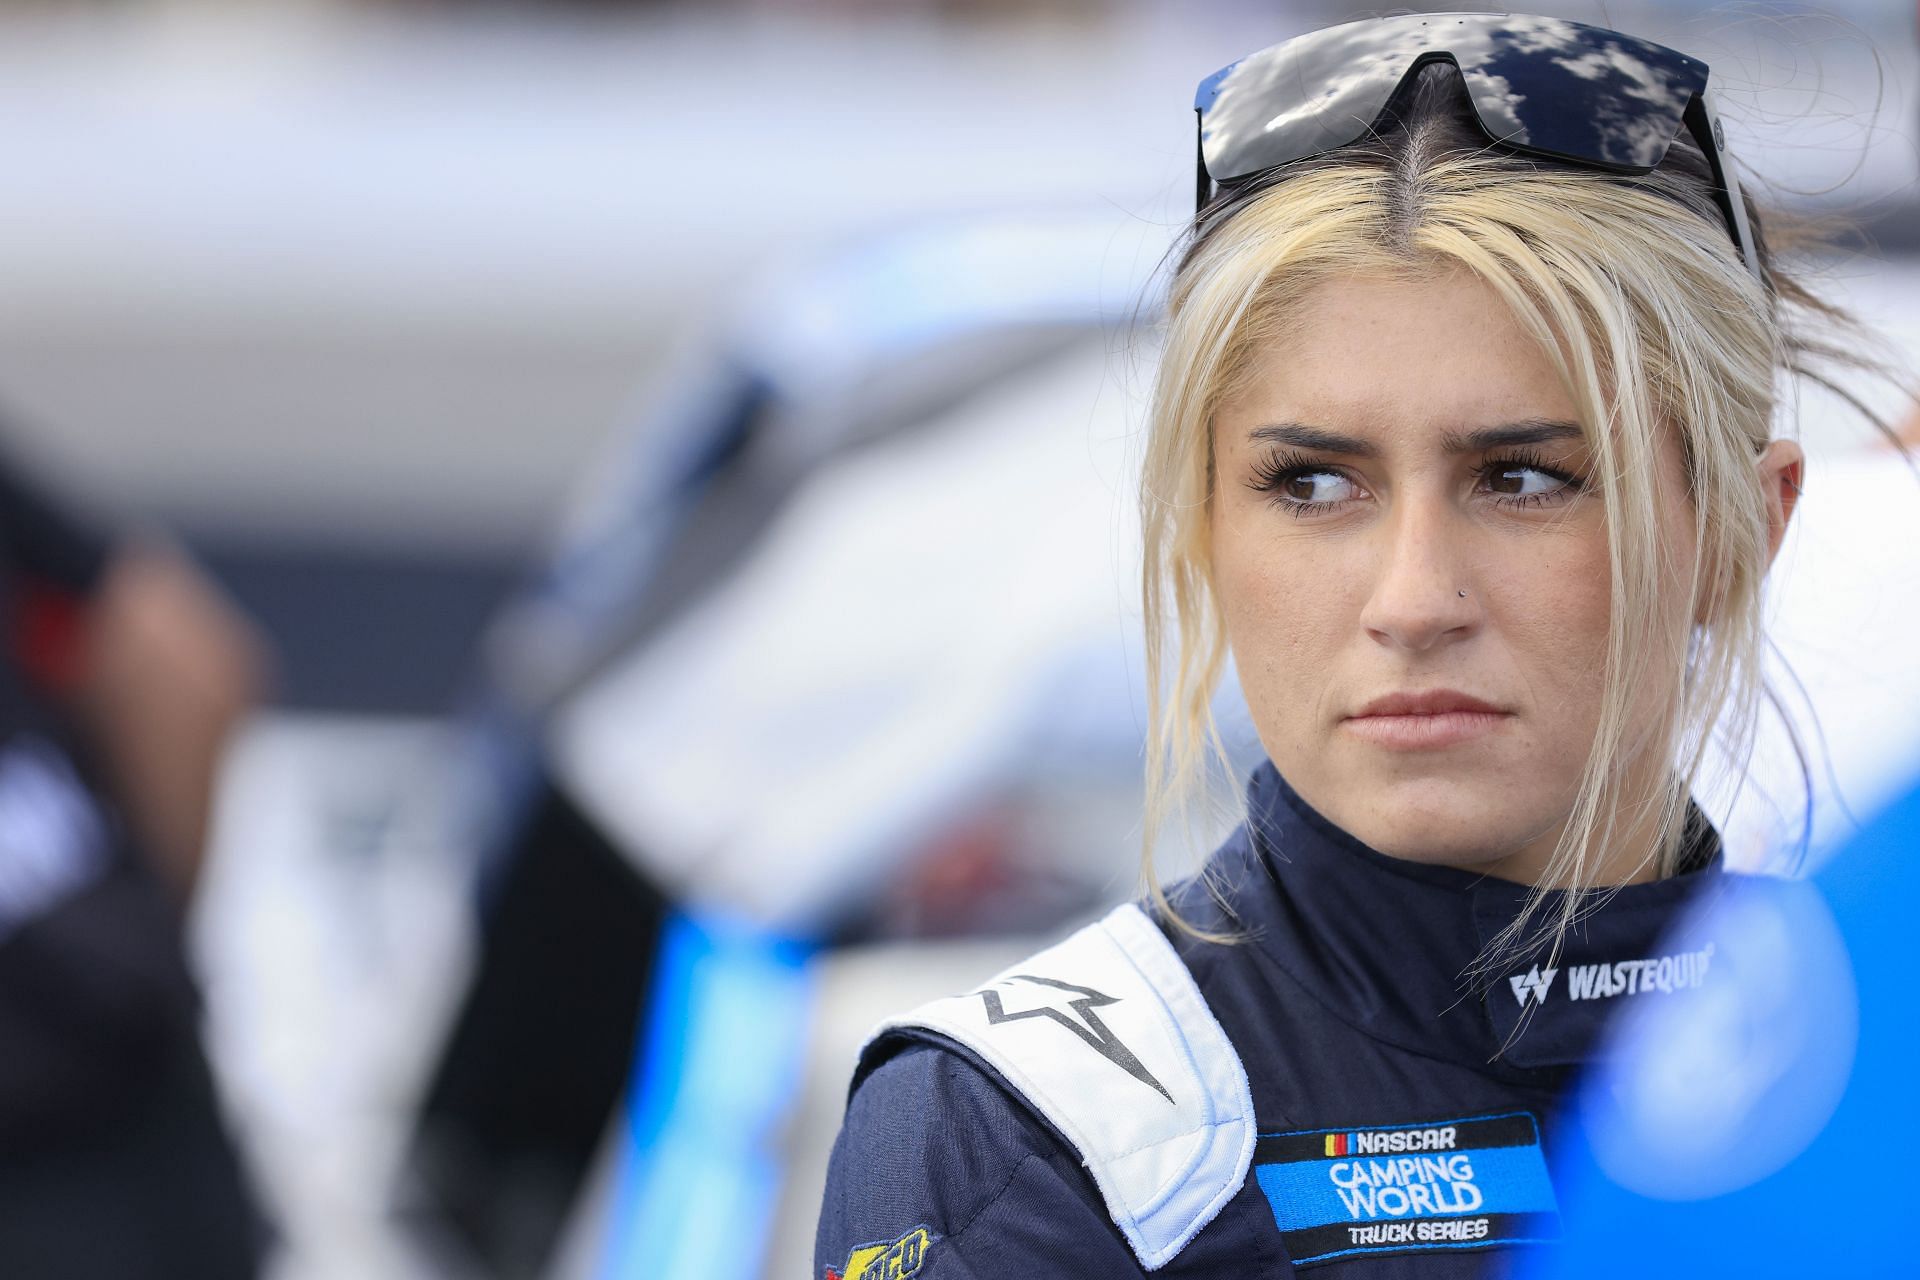 Hailie Deegan waits on the grid during qualifying for the 2022 NASCAR Camping World Truck Series TSport 200 at the Indianapolis Raceway Park in Indianapolis, Indiana. (Photo by Justin Casterline/Getty Images)